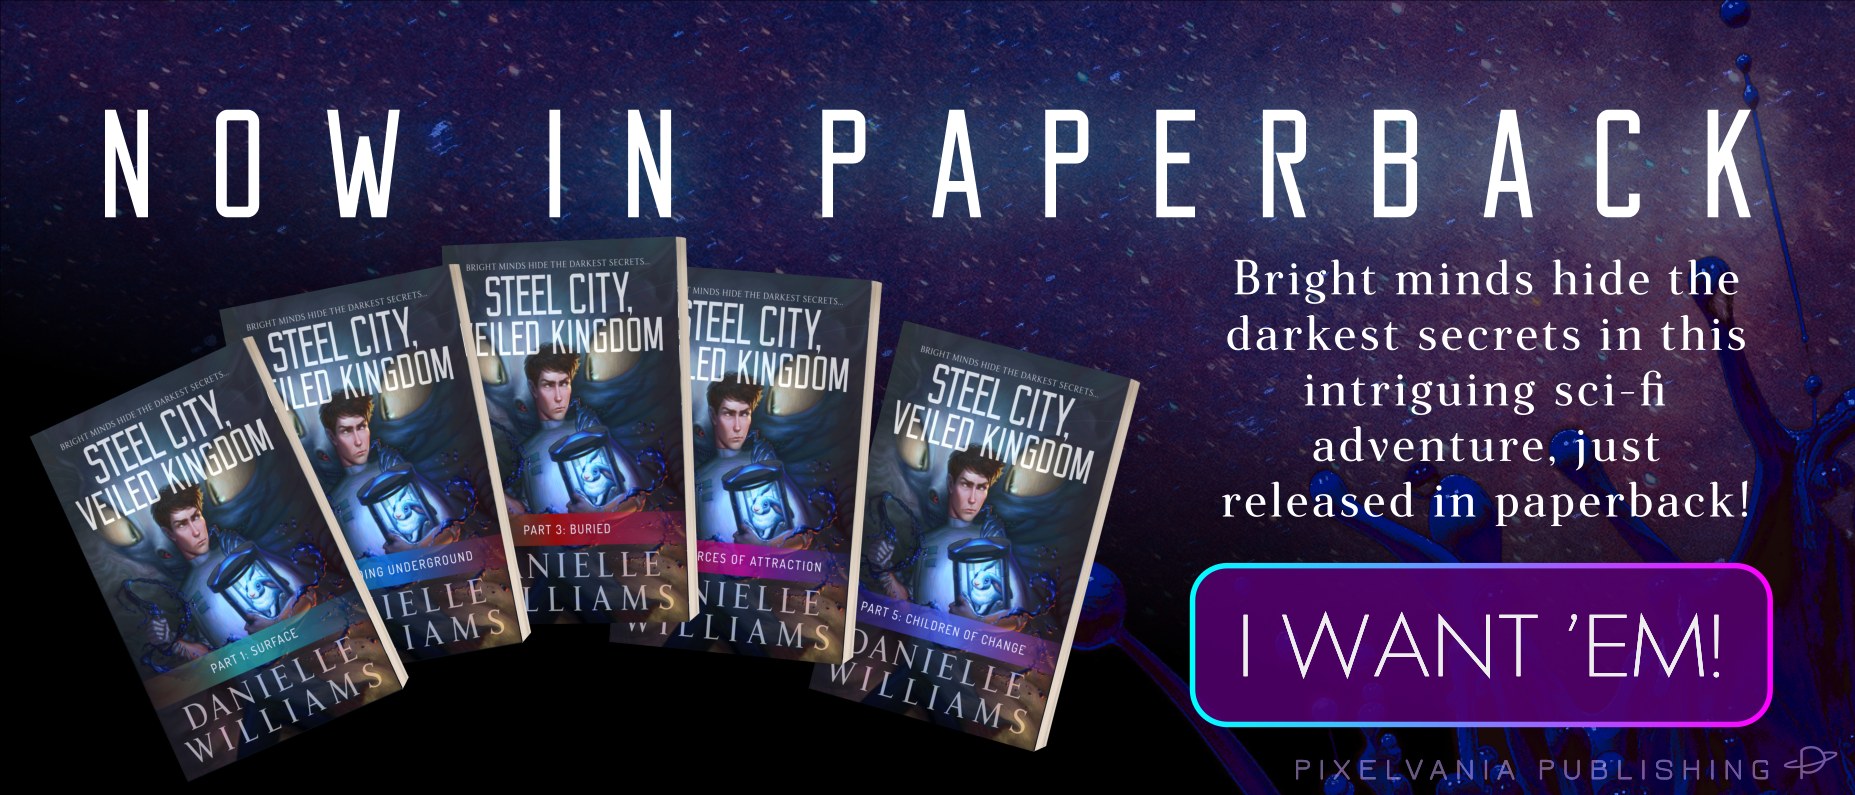 STEEL CITY, VEILED KINGDOM is now out in paperback! Click here to get your copy on Amazon.